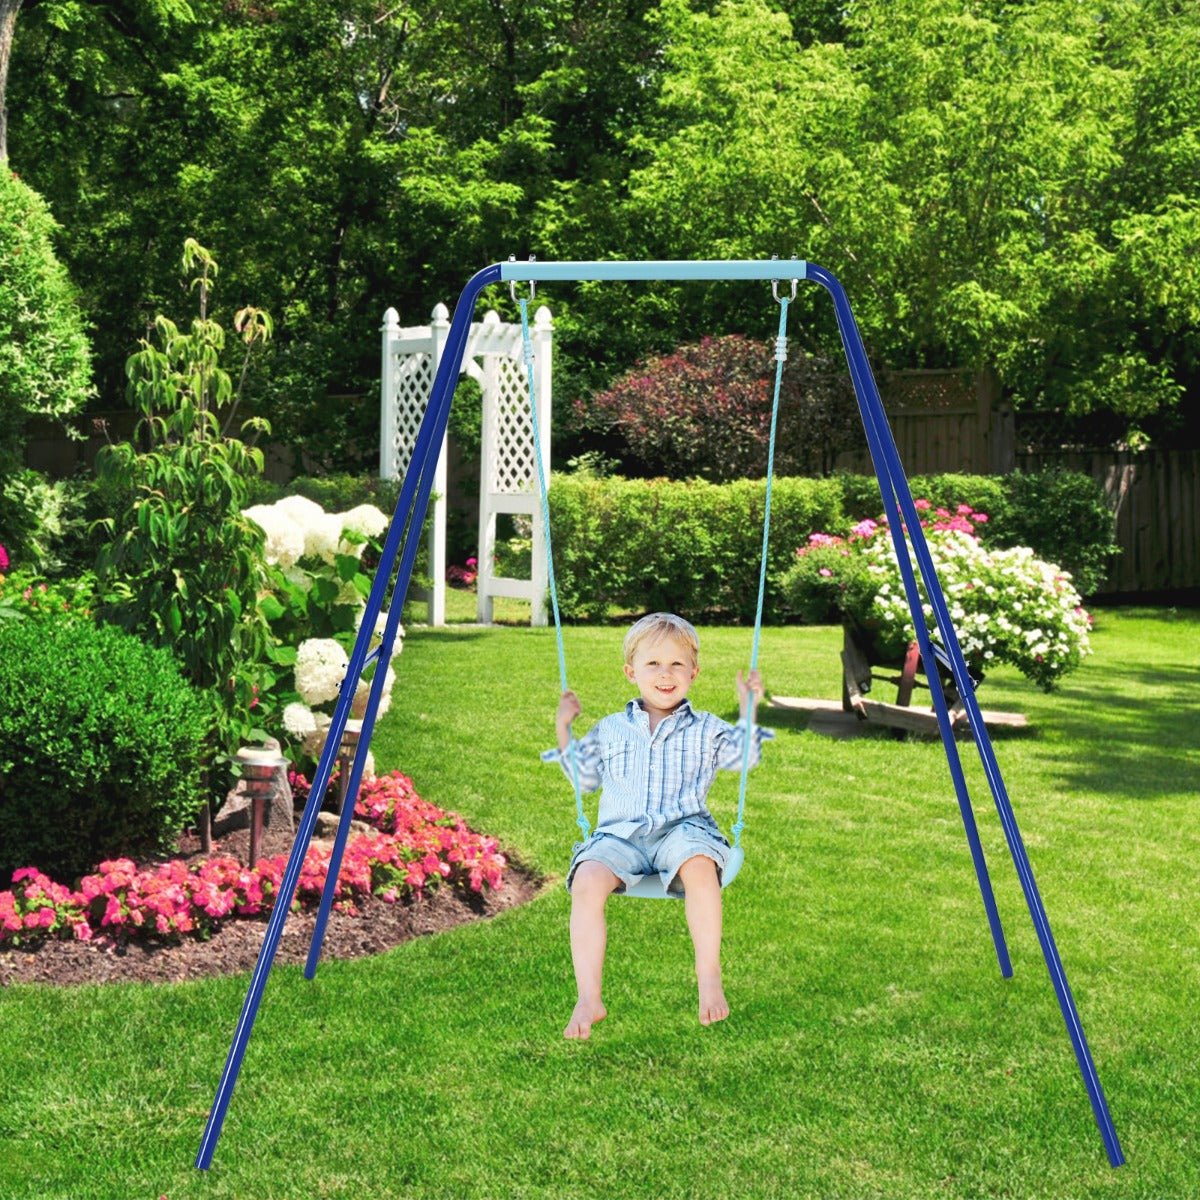 Metal Swing Set with A-Frame Design: Sturdy and Playful in Blue